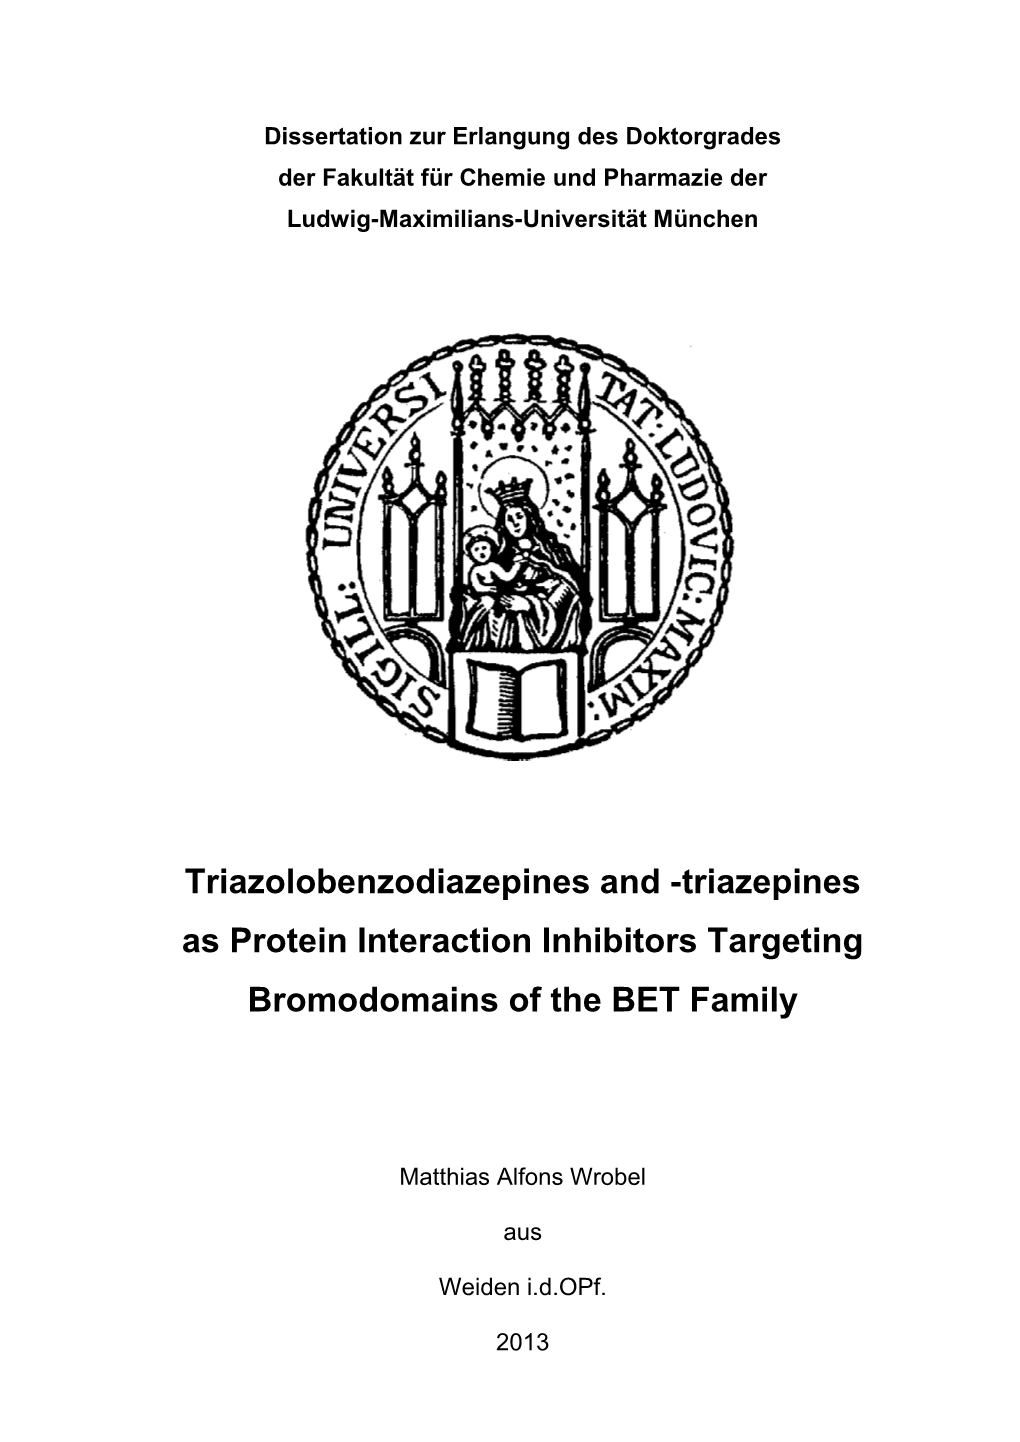 Triazolobenzodiazepines and -Triazepines As Protein Interaction Inhibitors Targeting Bromodomains of the BET Family